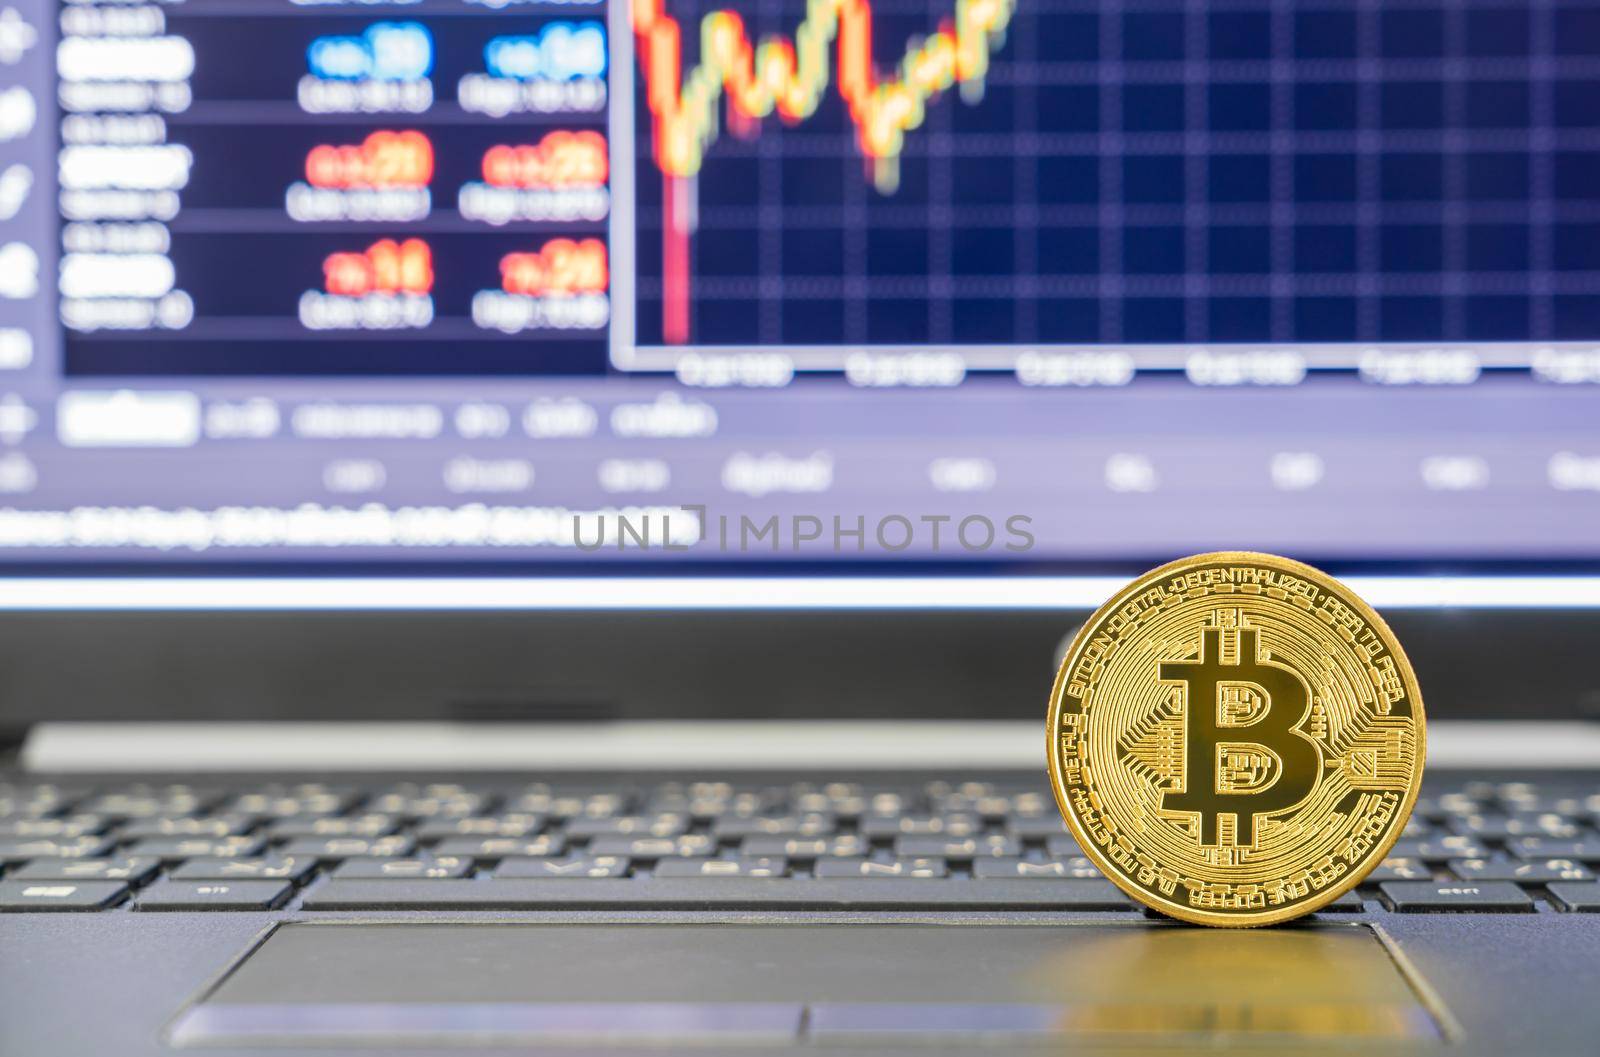 Bitcoins coin on keyboard computer. Close up of  bitcoin crypto currency coins with trading exchange market price chart in the background